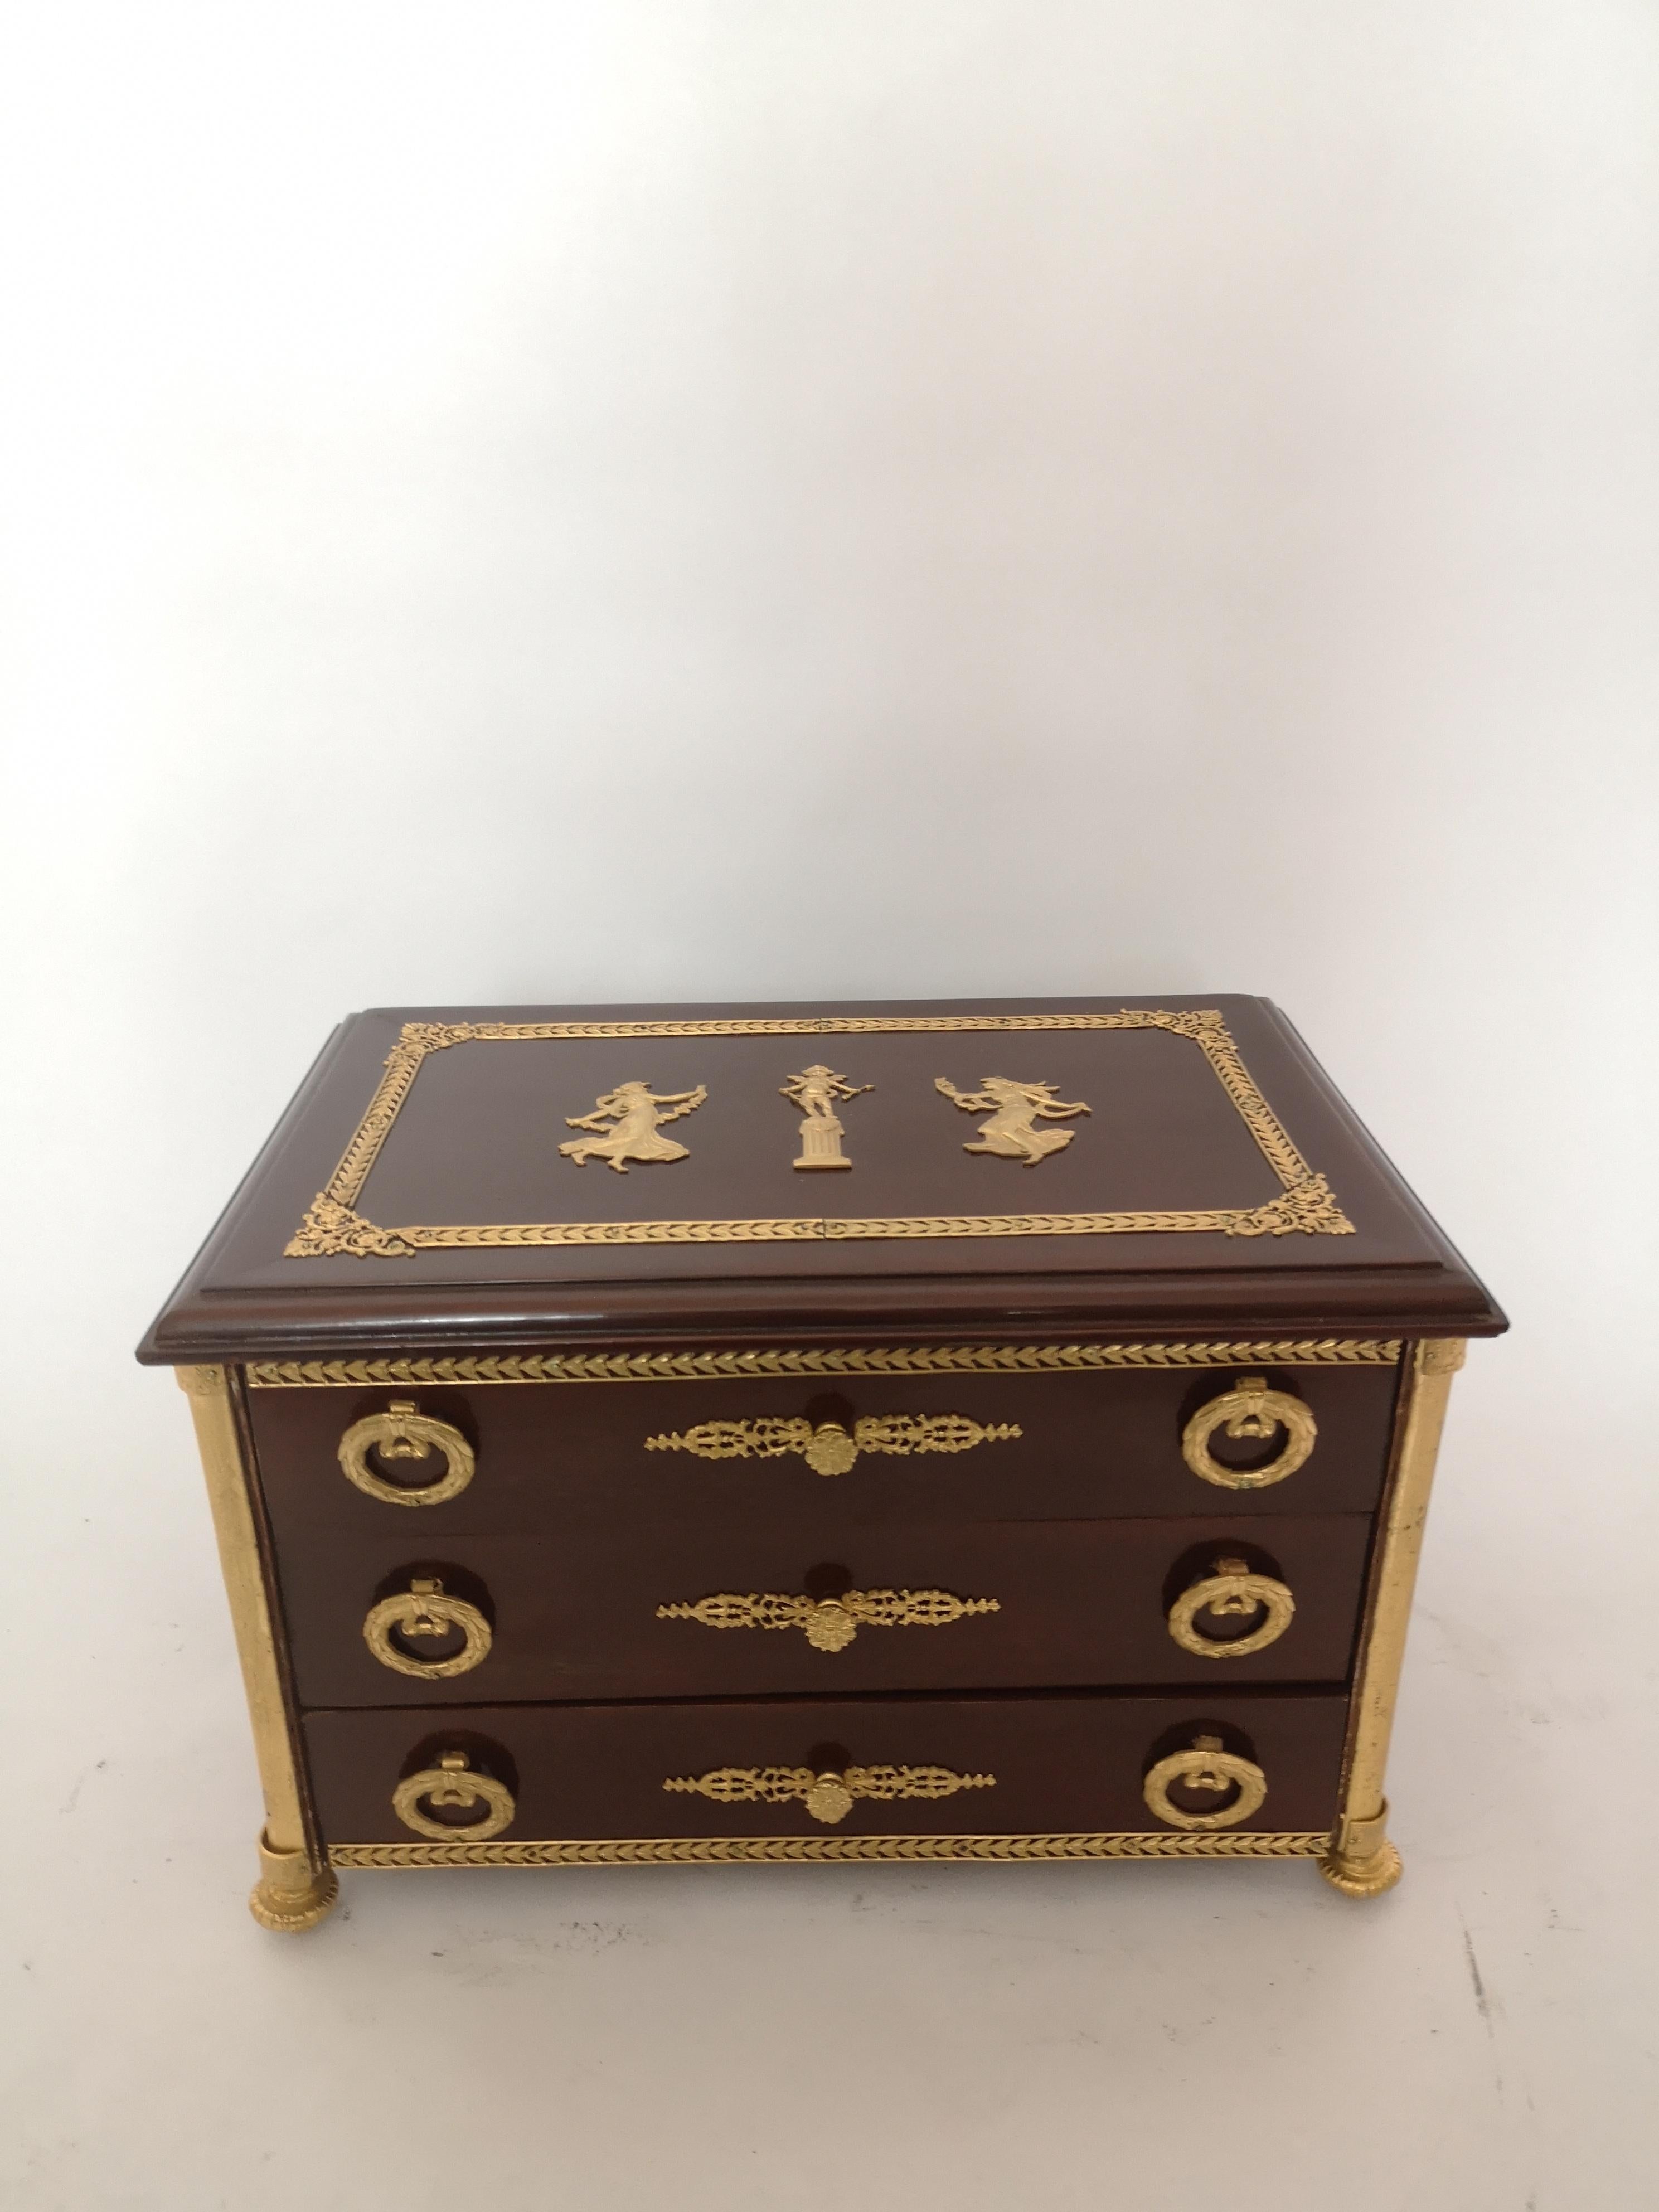 A rare French Empire style miniature chest, made from mahogany with gilt bronze mounts. The top and sides decorated with cherub and classical maiden mounts. The three drawers with wreath handles and a bronze knob, standing on four bronze